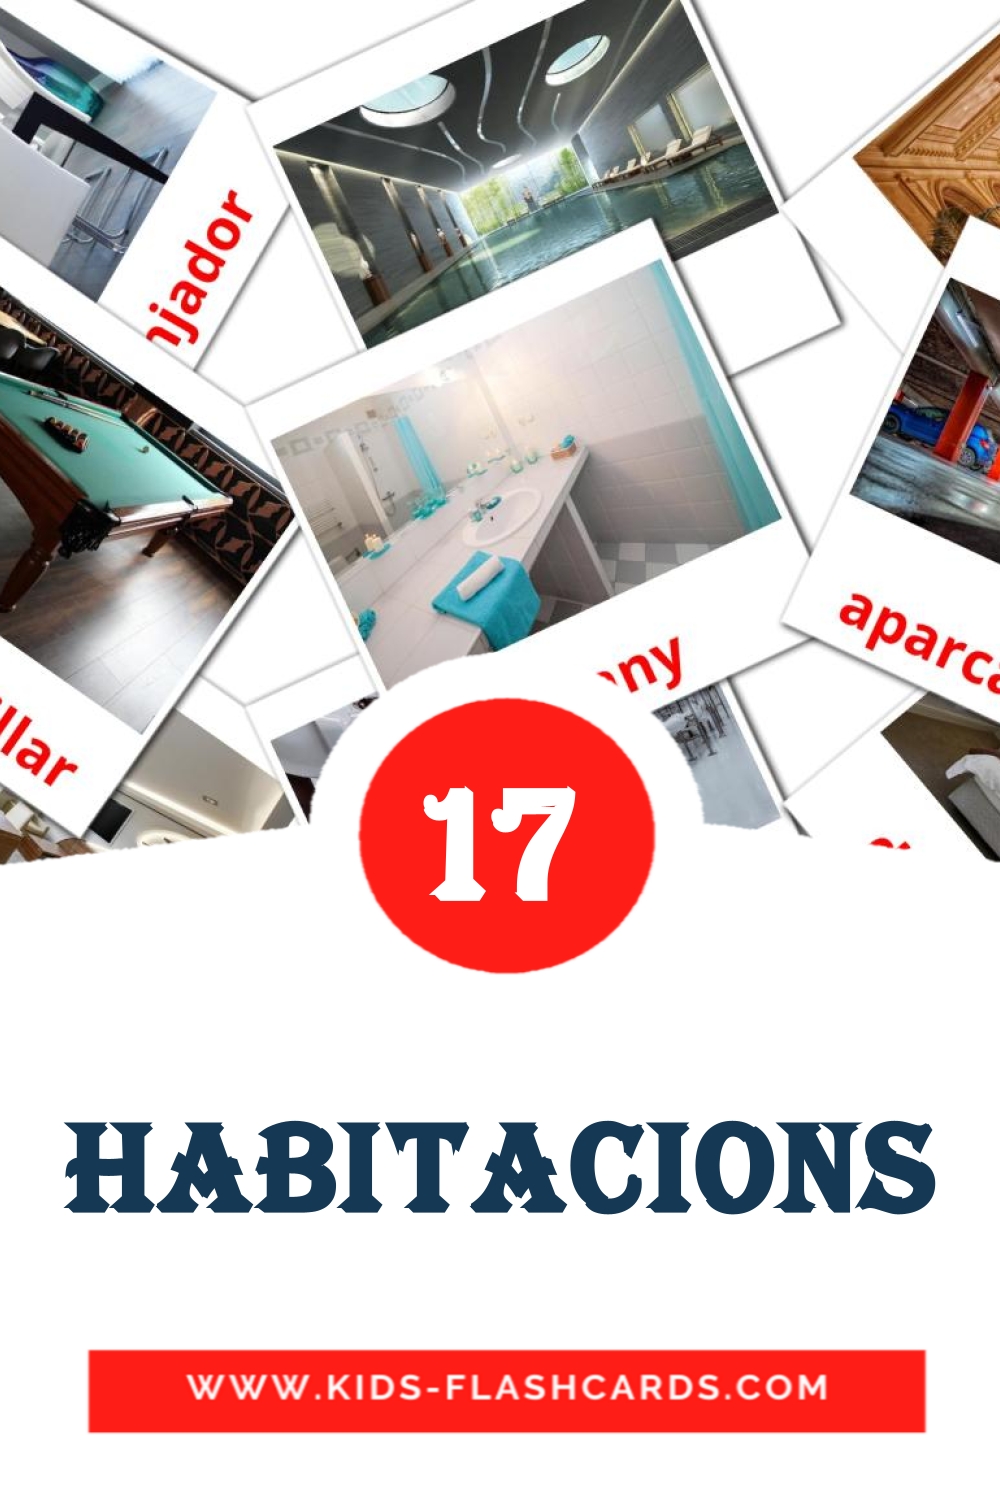 17 Habitacions Picture Cards for Kindergarden in catalan